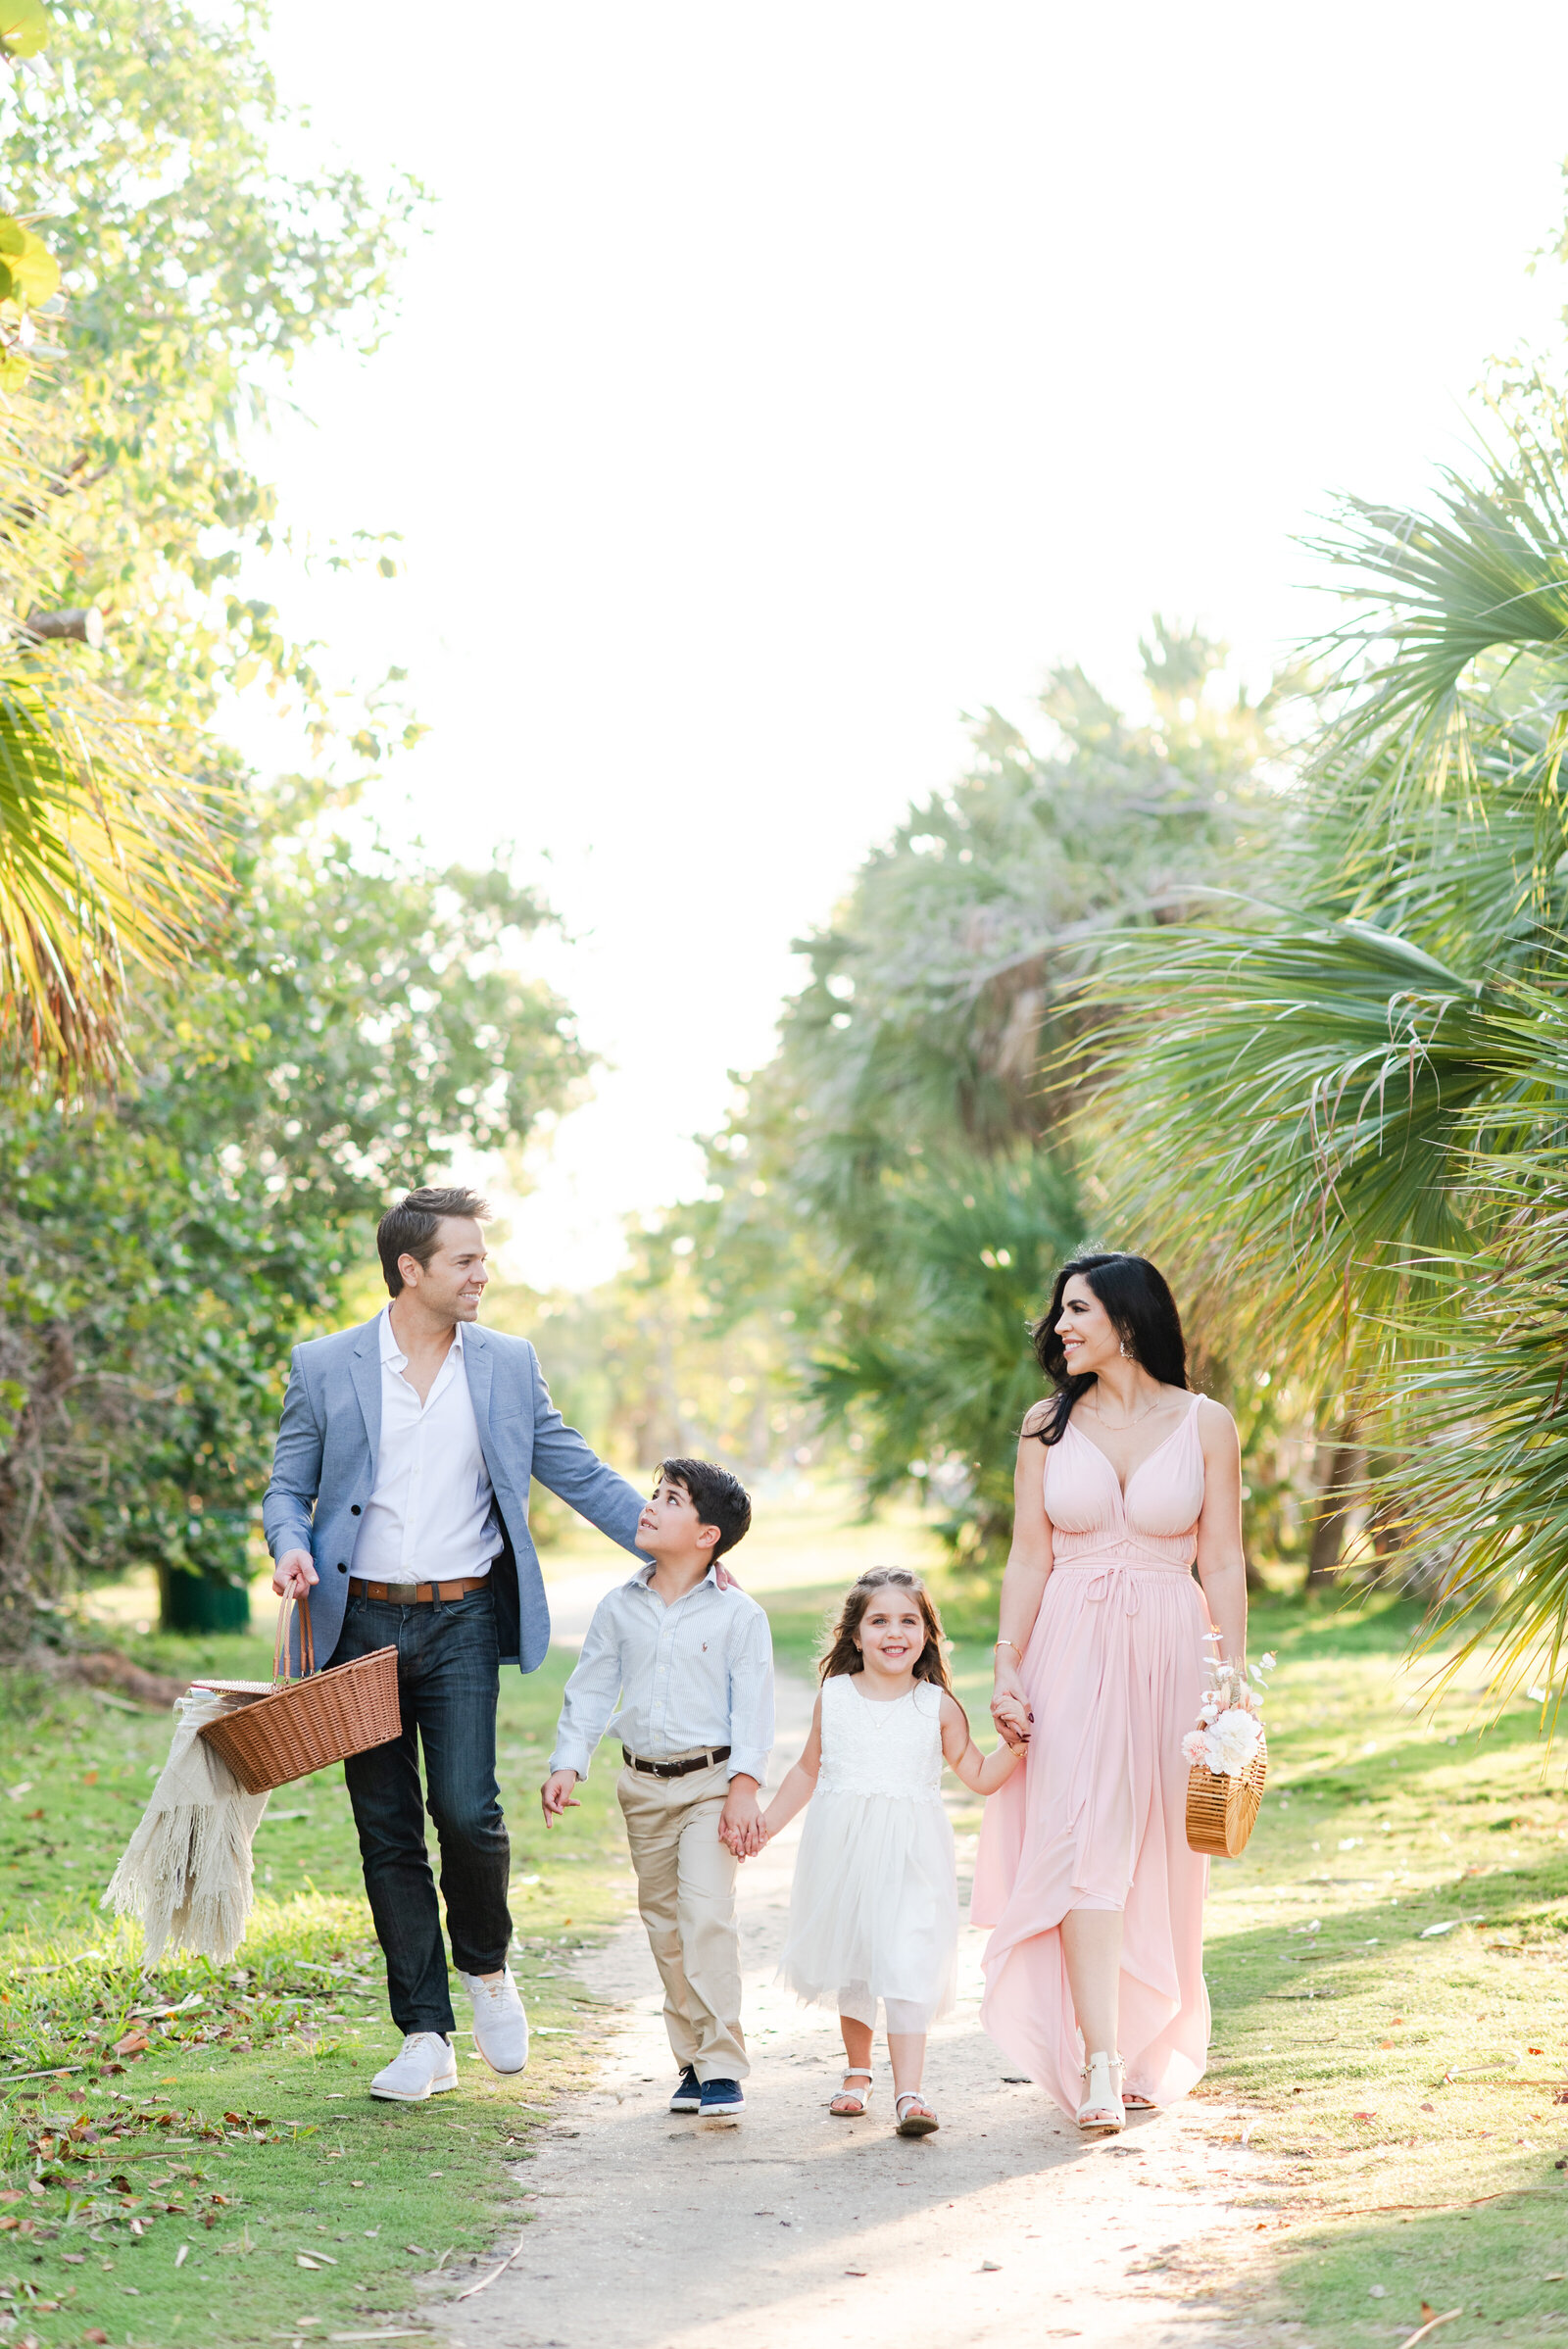 mom and dad with two young kids picnic family session at hugh birch state park Miami lifestyle photographers David and Meivys of MSP Photography